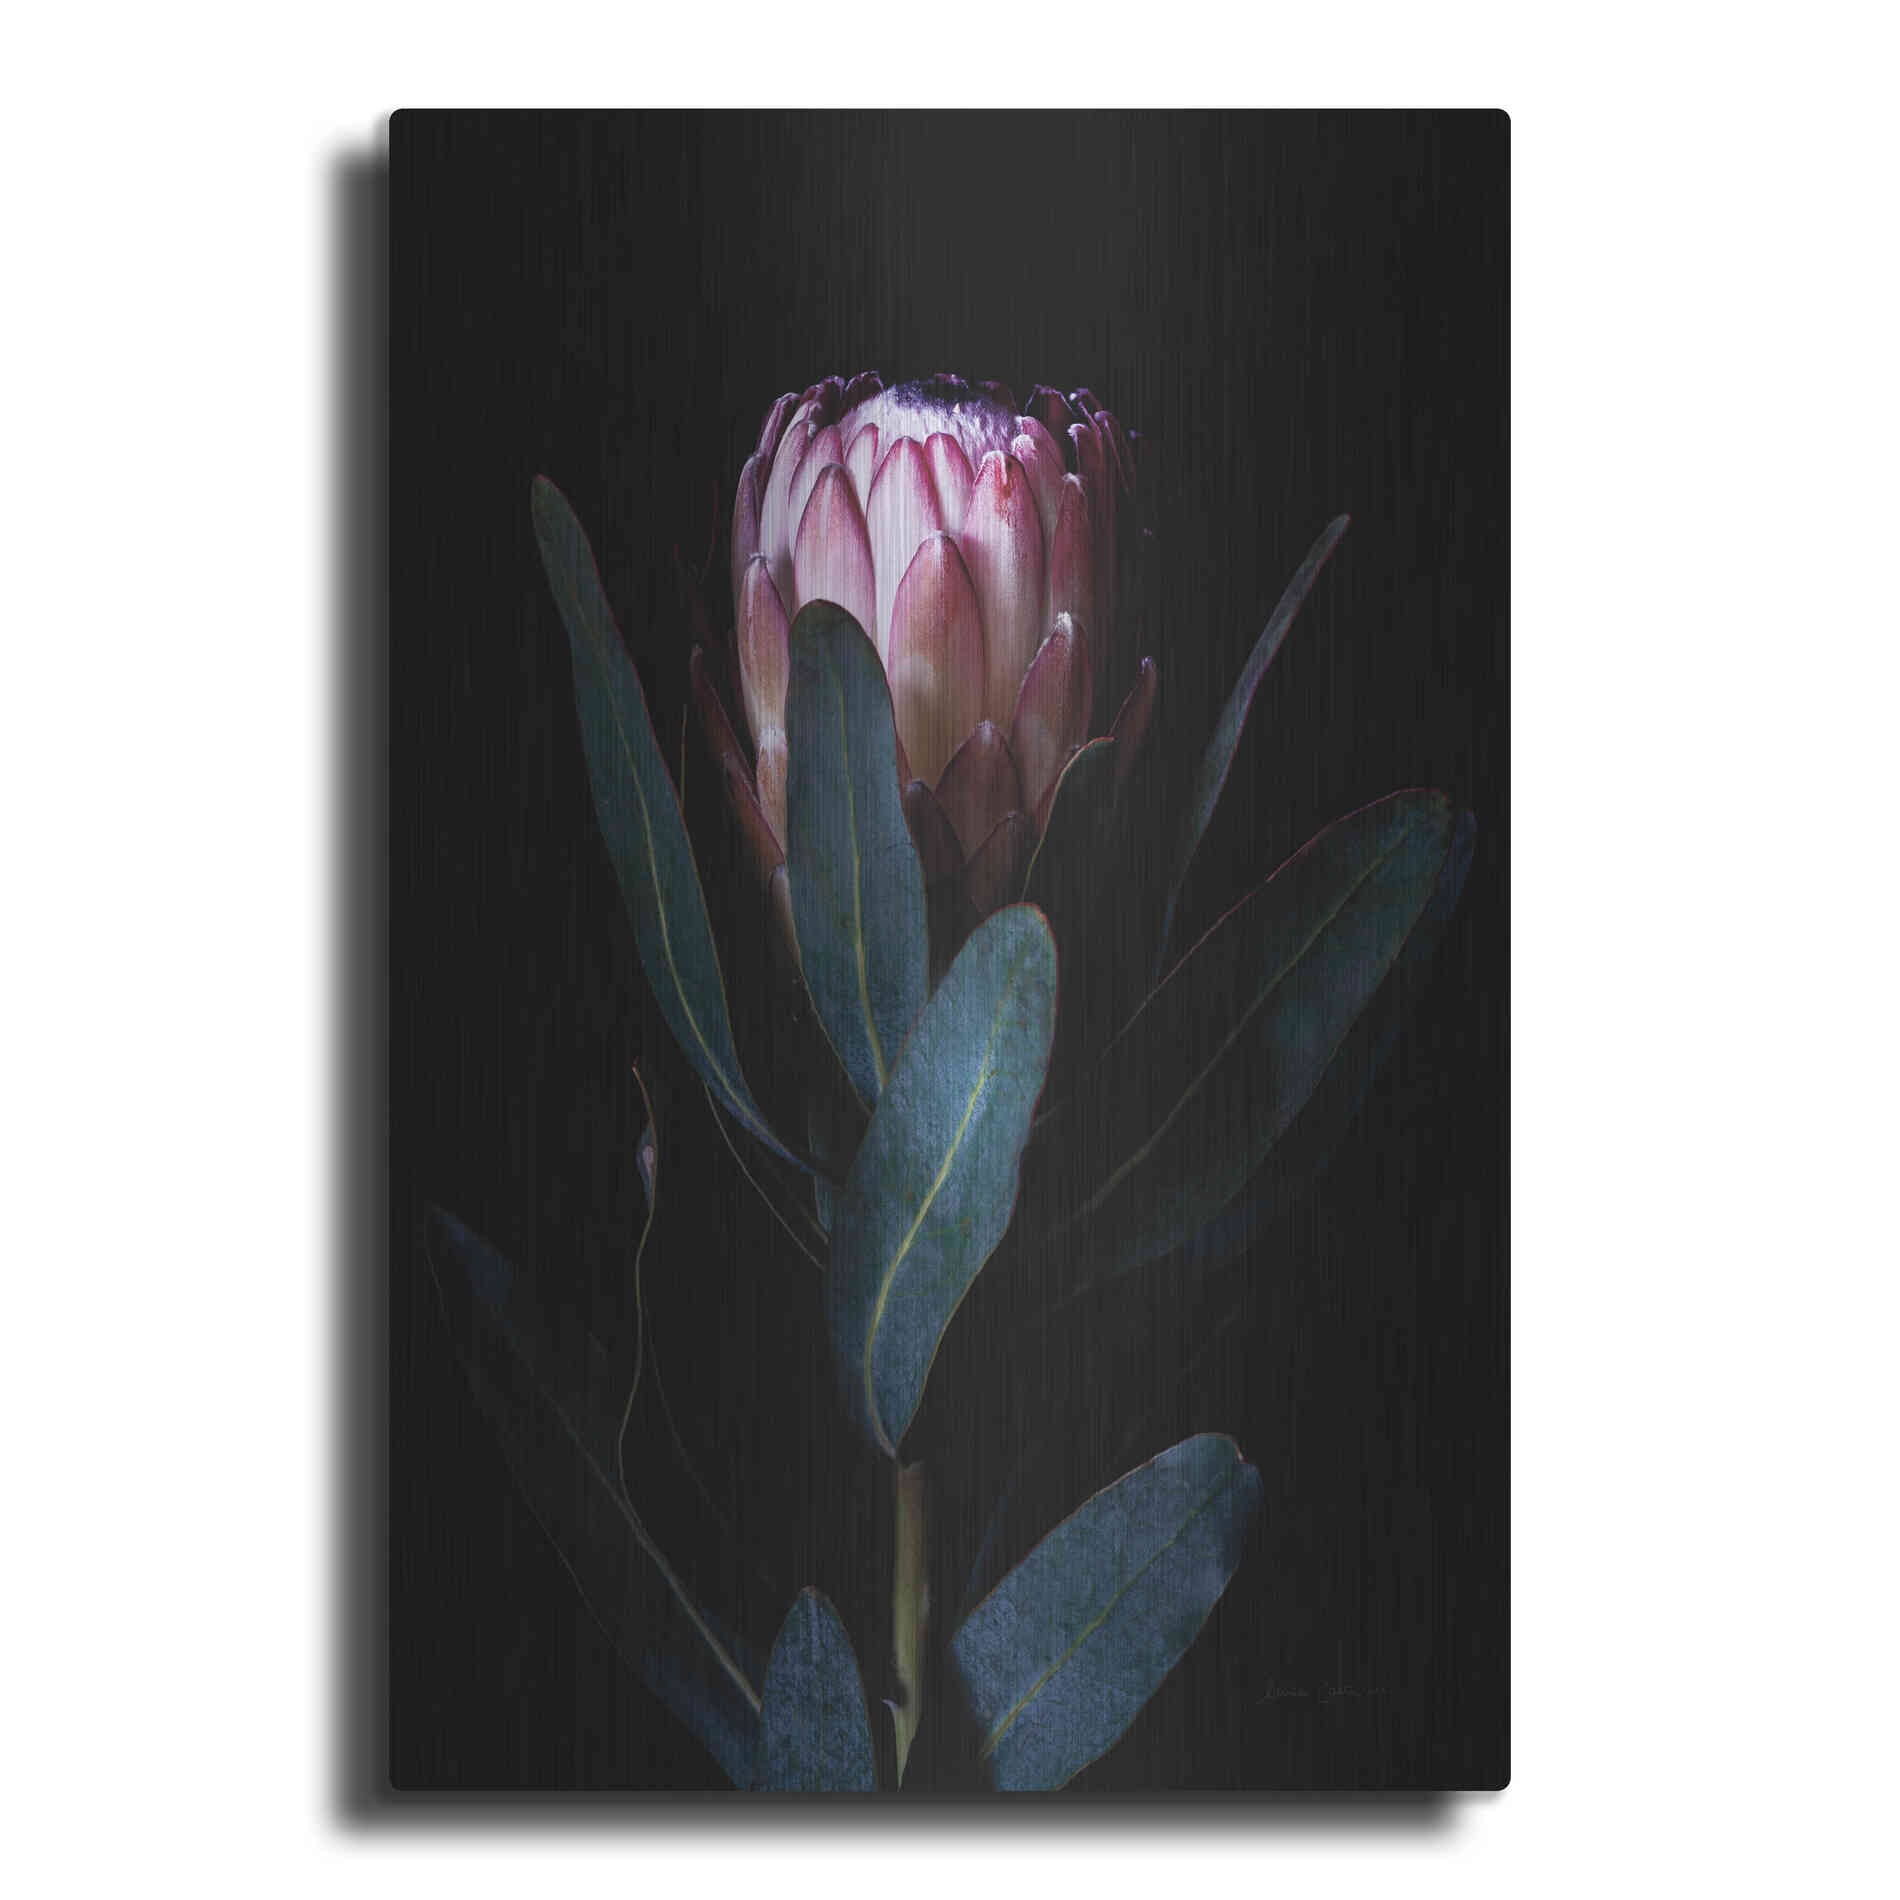 Luxe Metal Art 'Protea Portrait' by Elise Catterall, Metal Wall Art